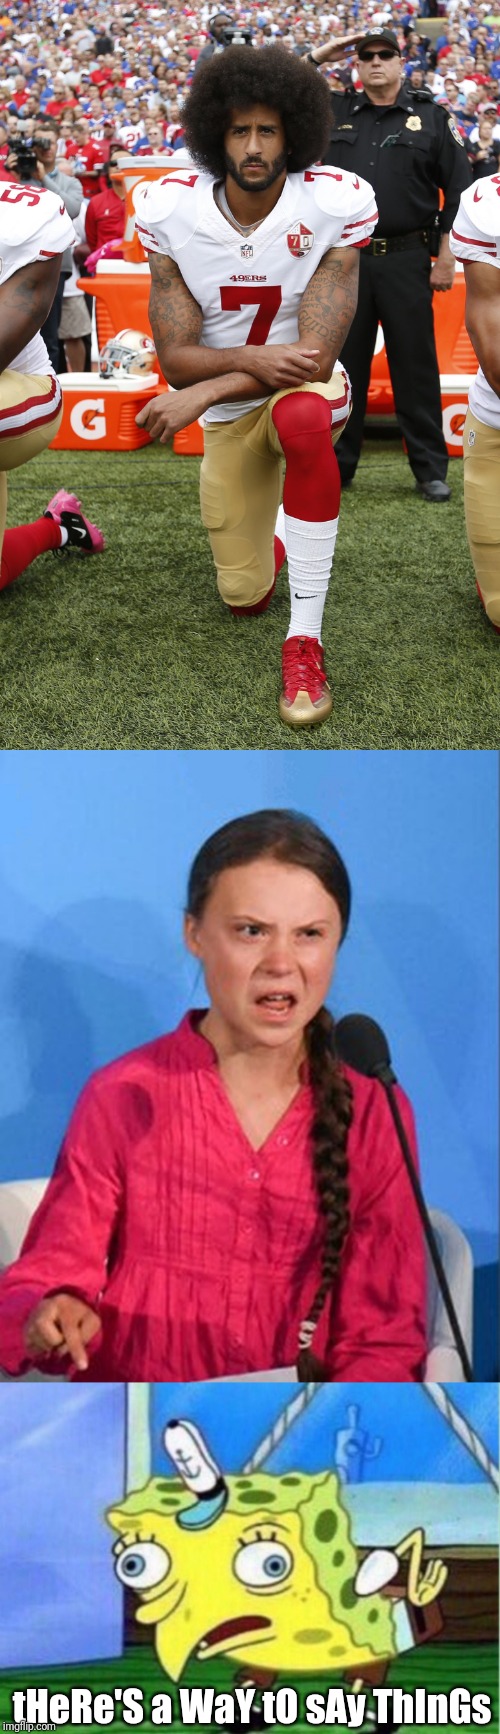 tHeRe'S a WaY tO sAy ThInGs | image tagged in memes,mocking spongebob,colin kaepernick,greta thunberg how dare you | made w/ Imgflip meme maker